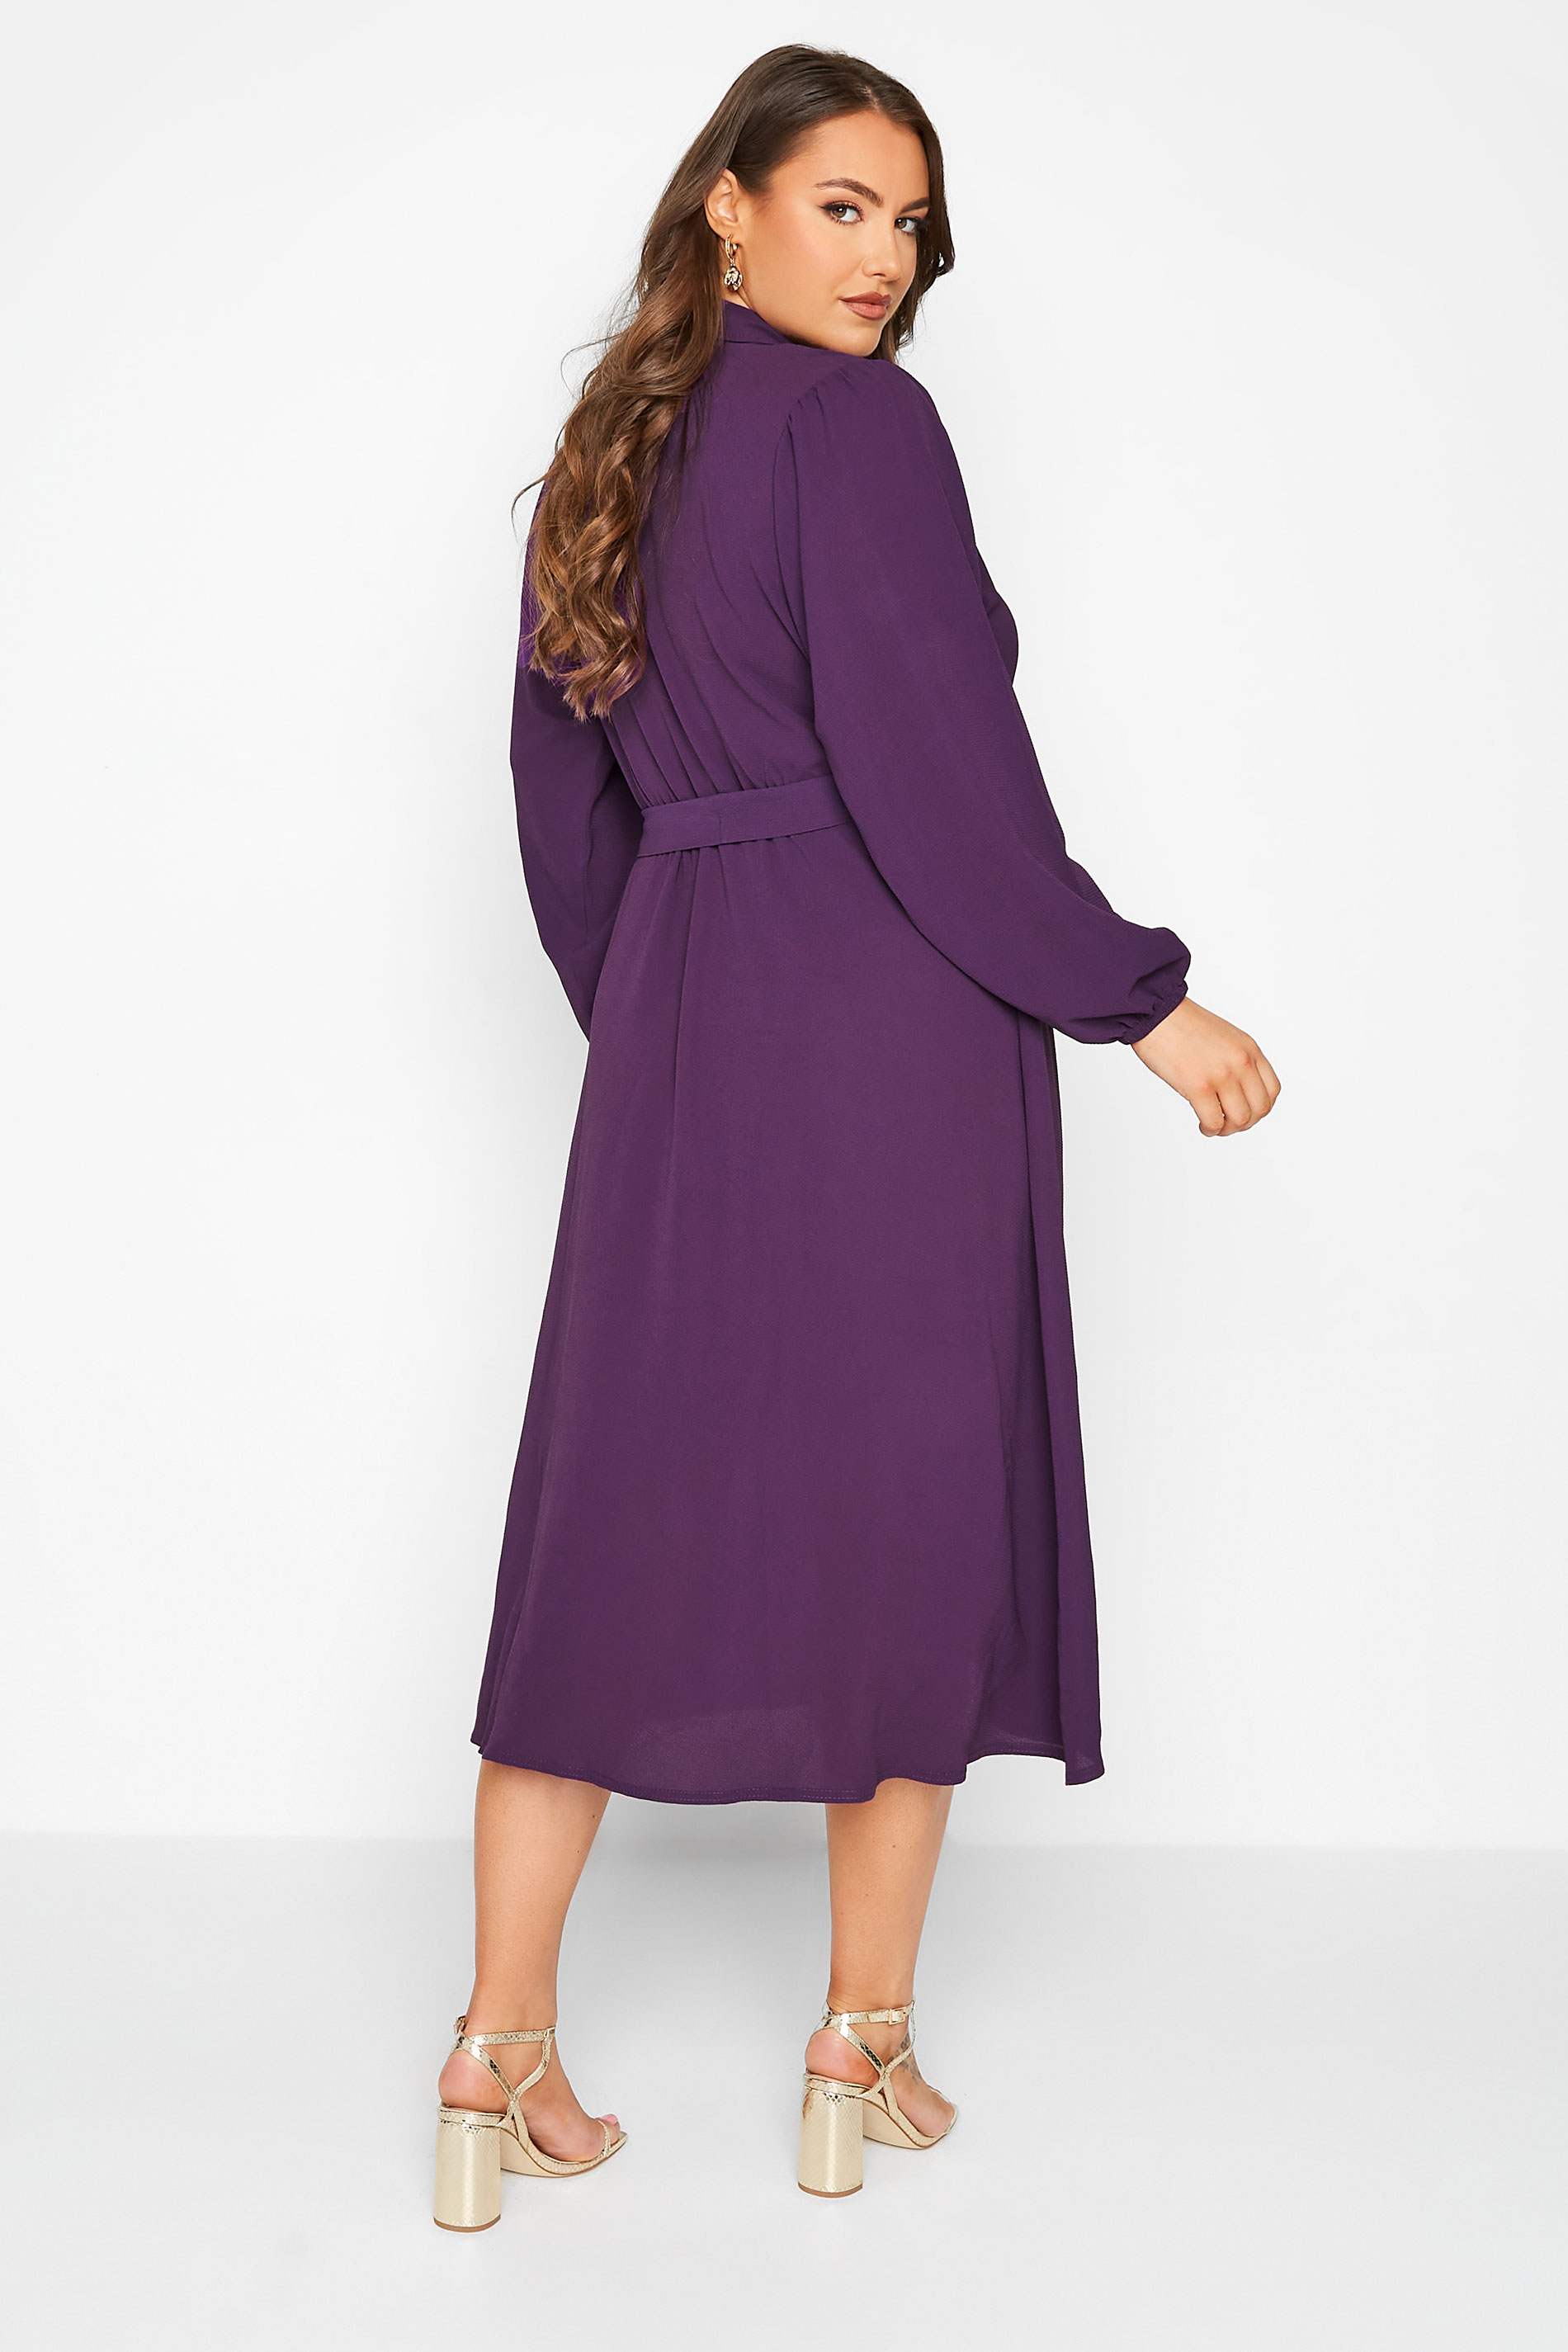 LIMITED COLLECTION Plus Size Purple Wrap Dress | Yours Clothing 3